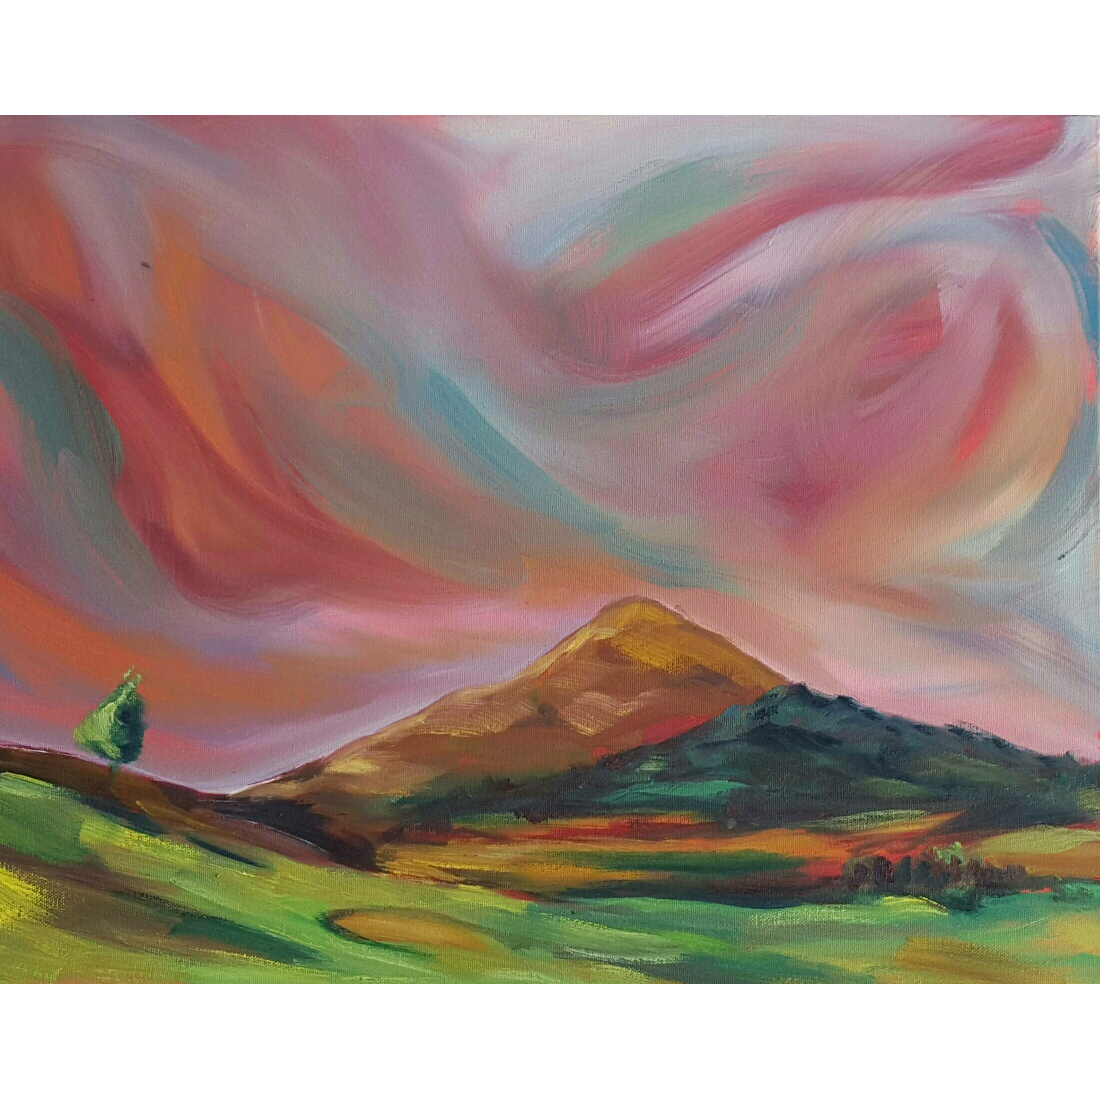 Irsh Landscape painting of the Sugarloaf in Wicklow Ireland